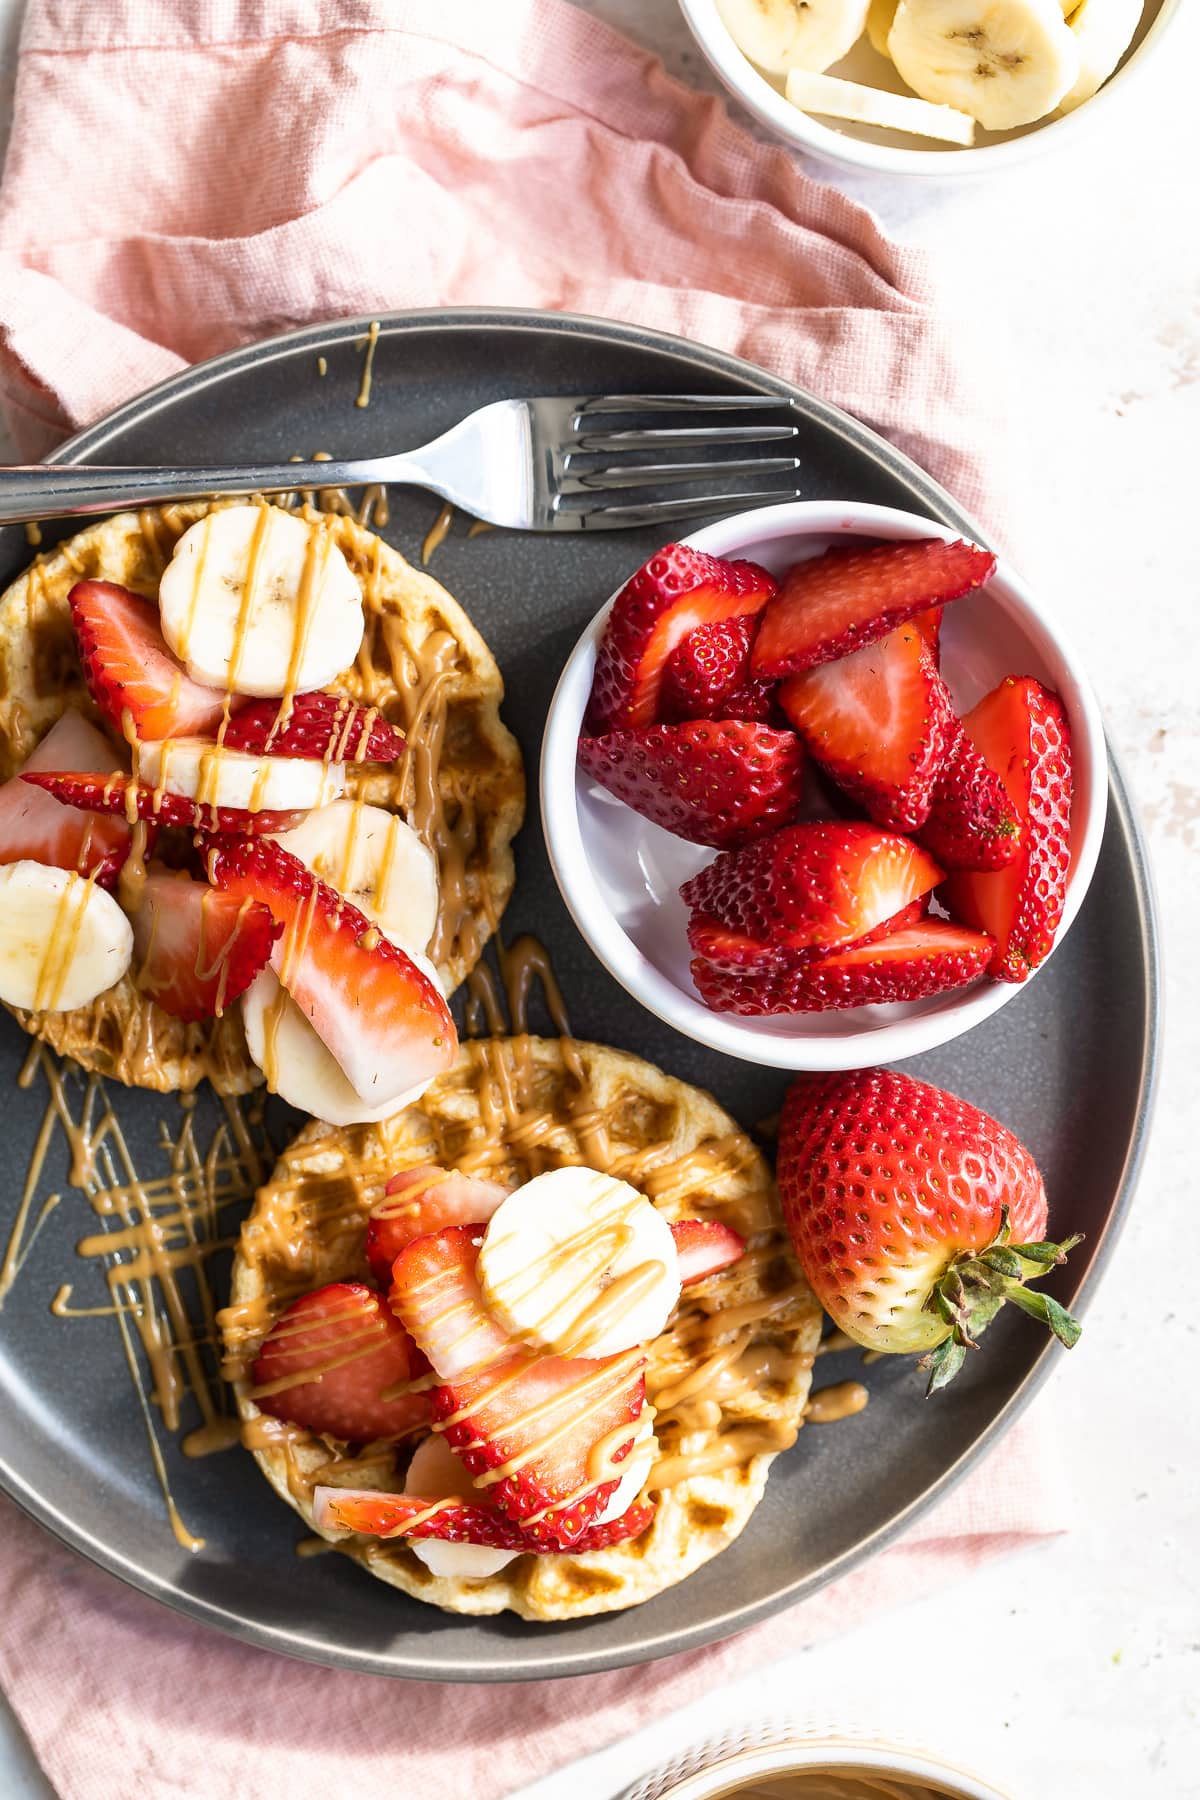 Waffles with strawberries, peanut ،er and bananas.